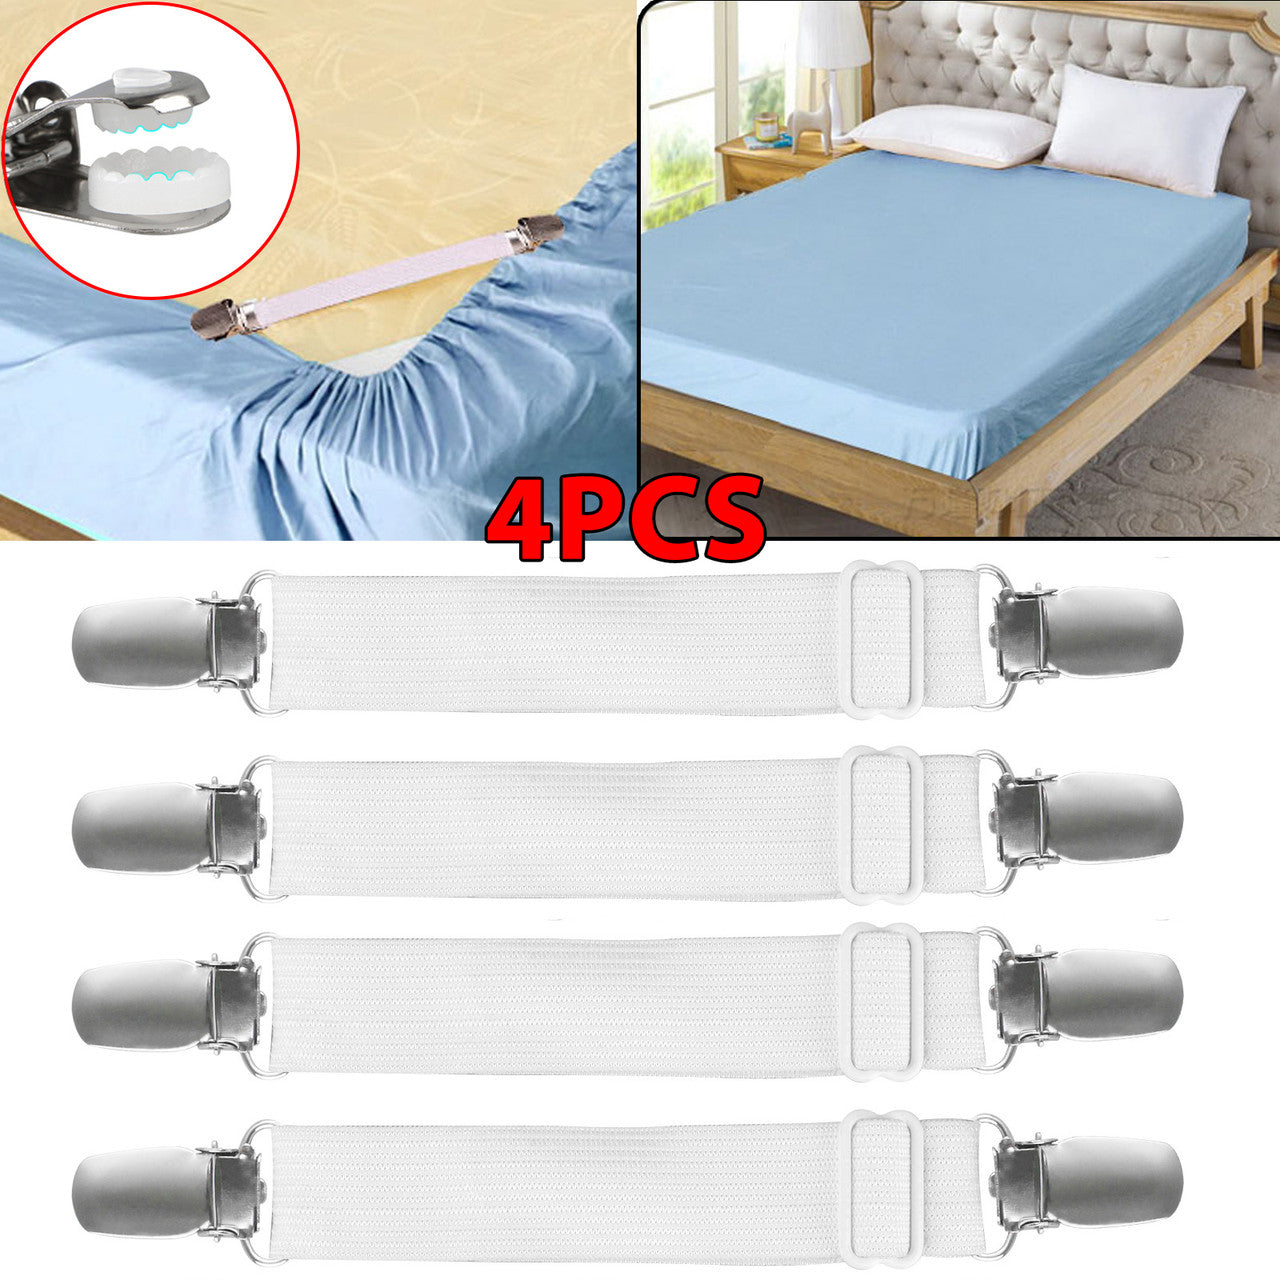 Sheet Band Straps Suspenders White Adjustable Bed Corner Holder Elastic Fasteners Clips Grippers Mattress Pad Cover Fitted, 4Pcs